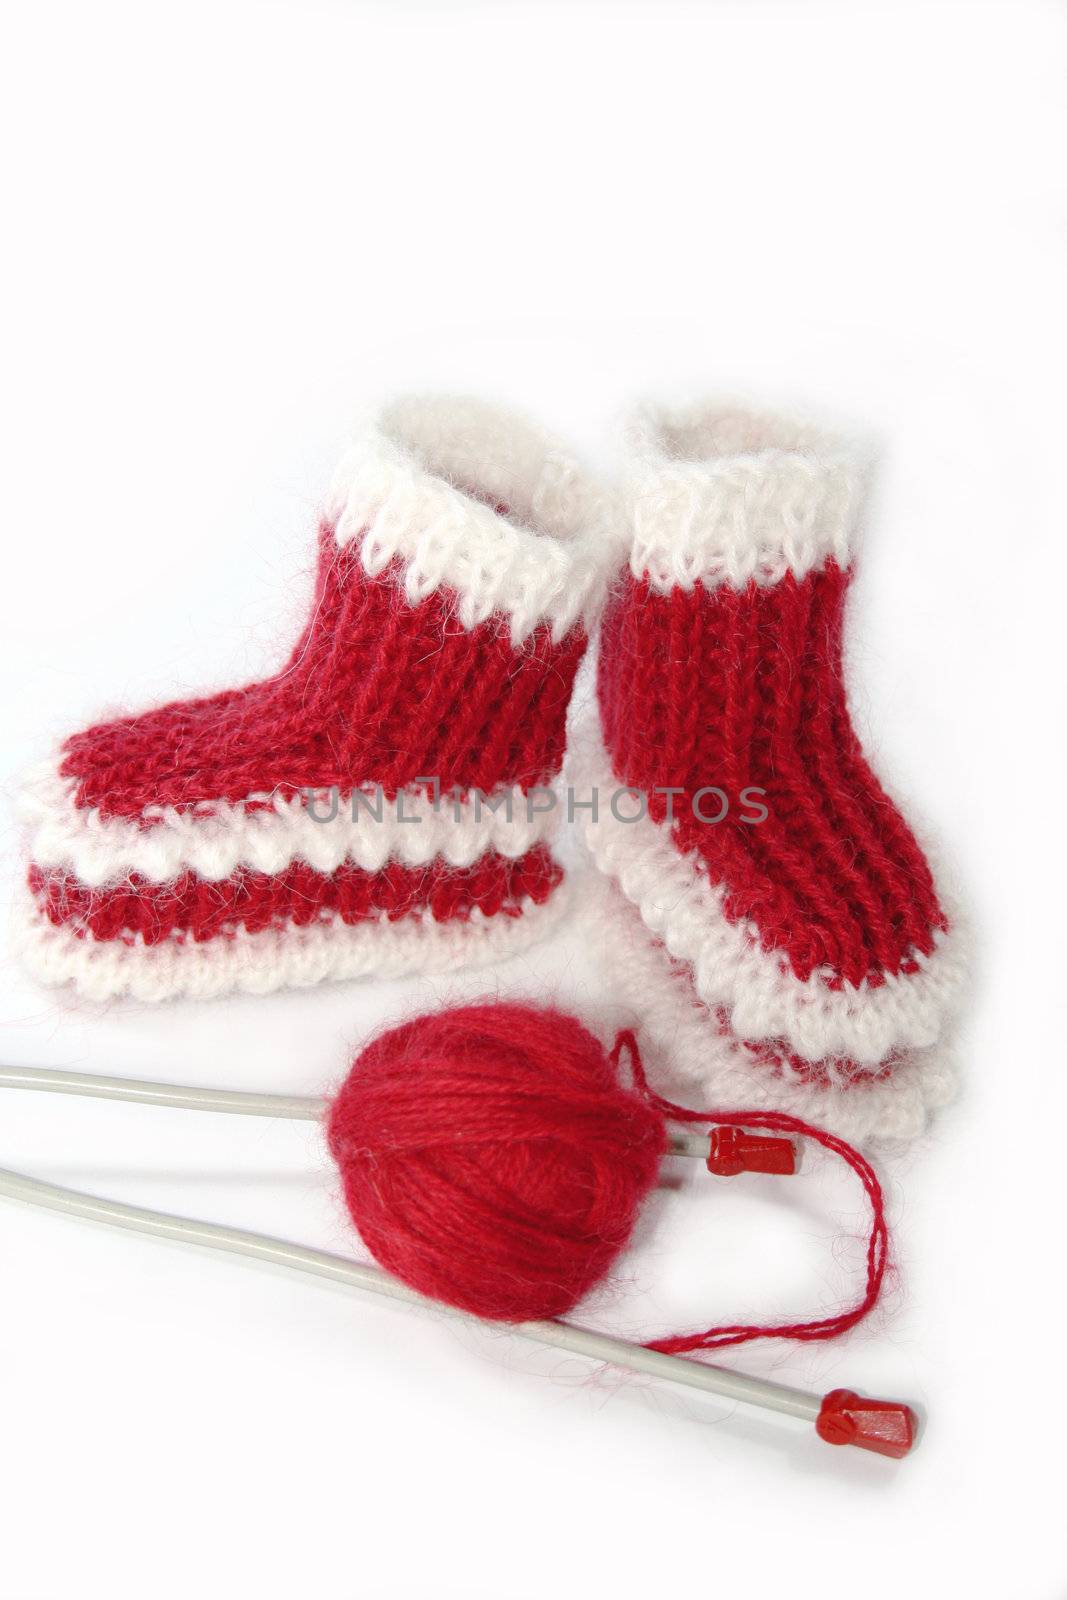 Bound baby's bootees for baby's with a ball of red yarn and knitting